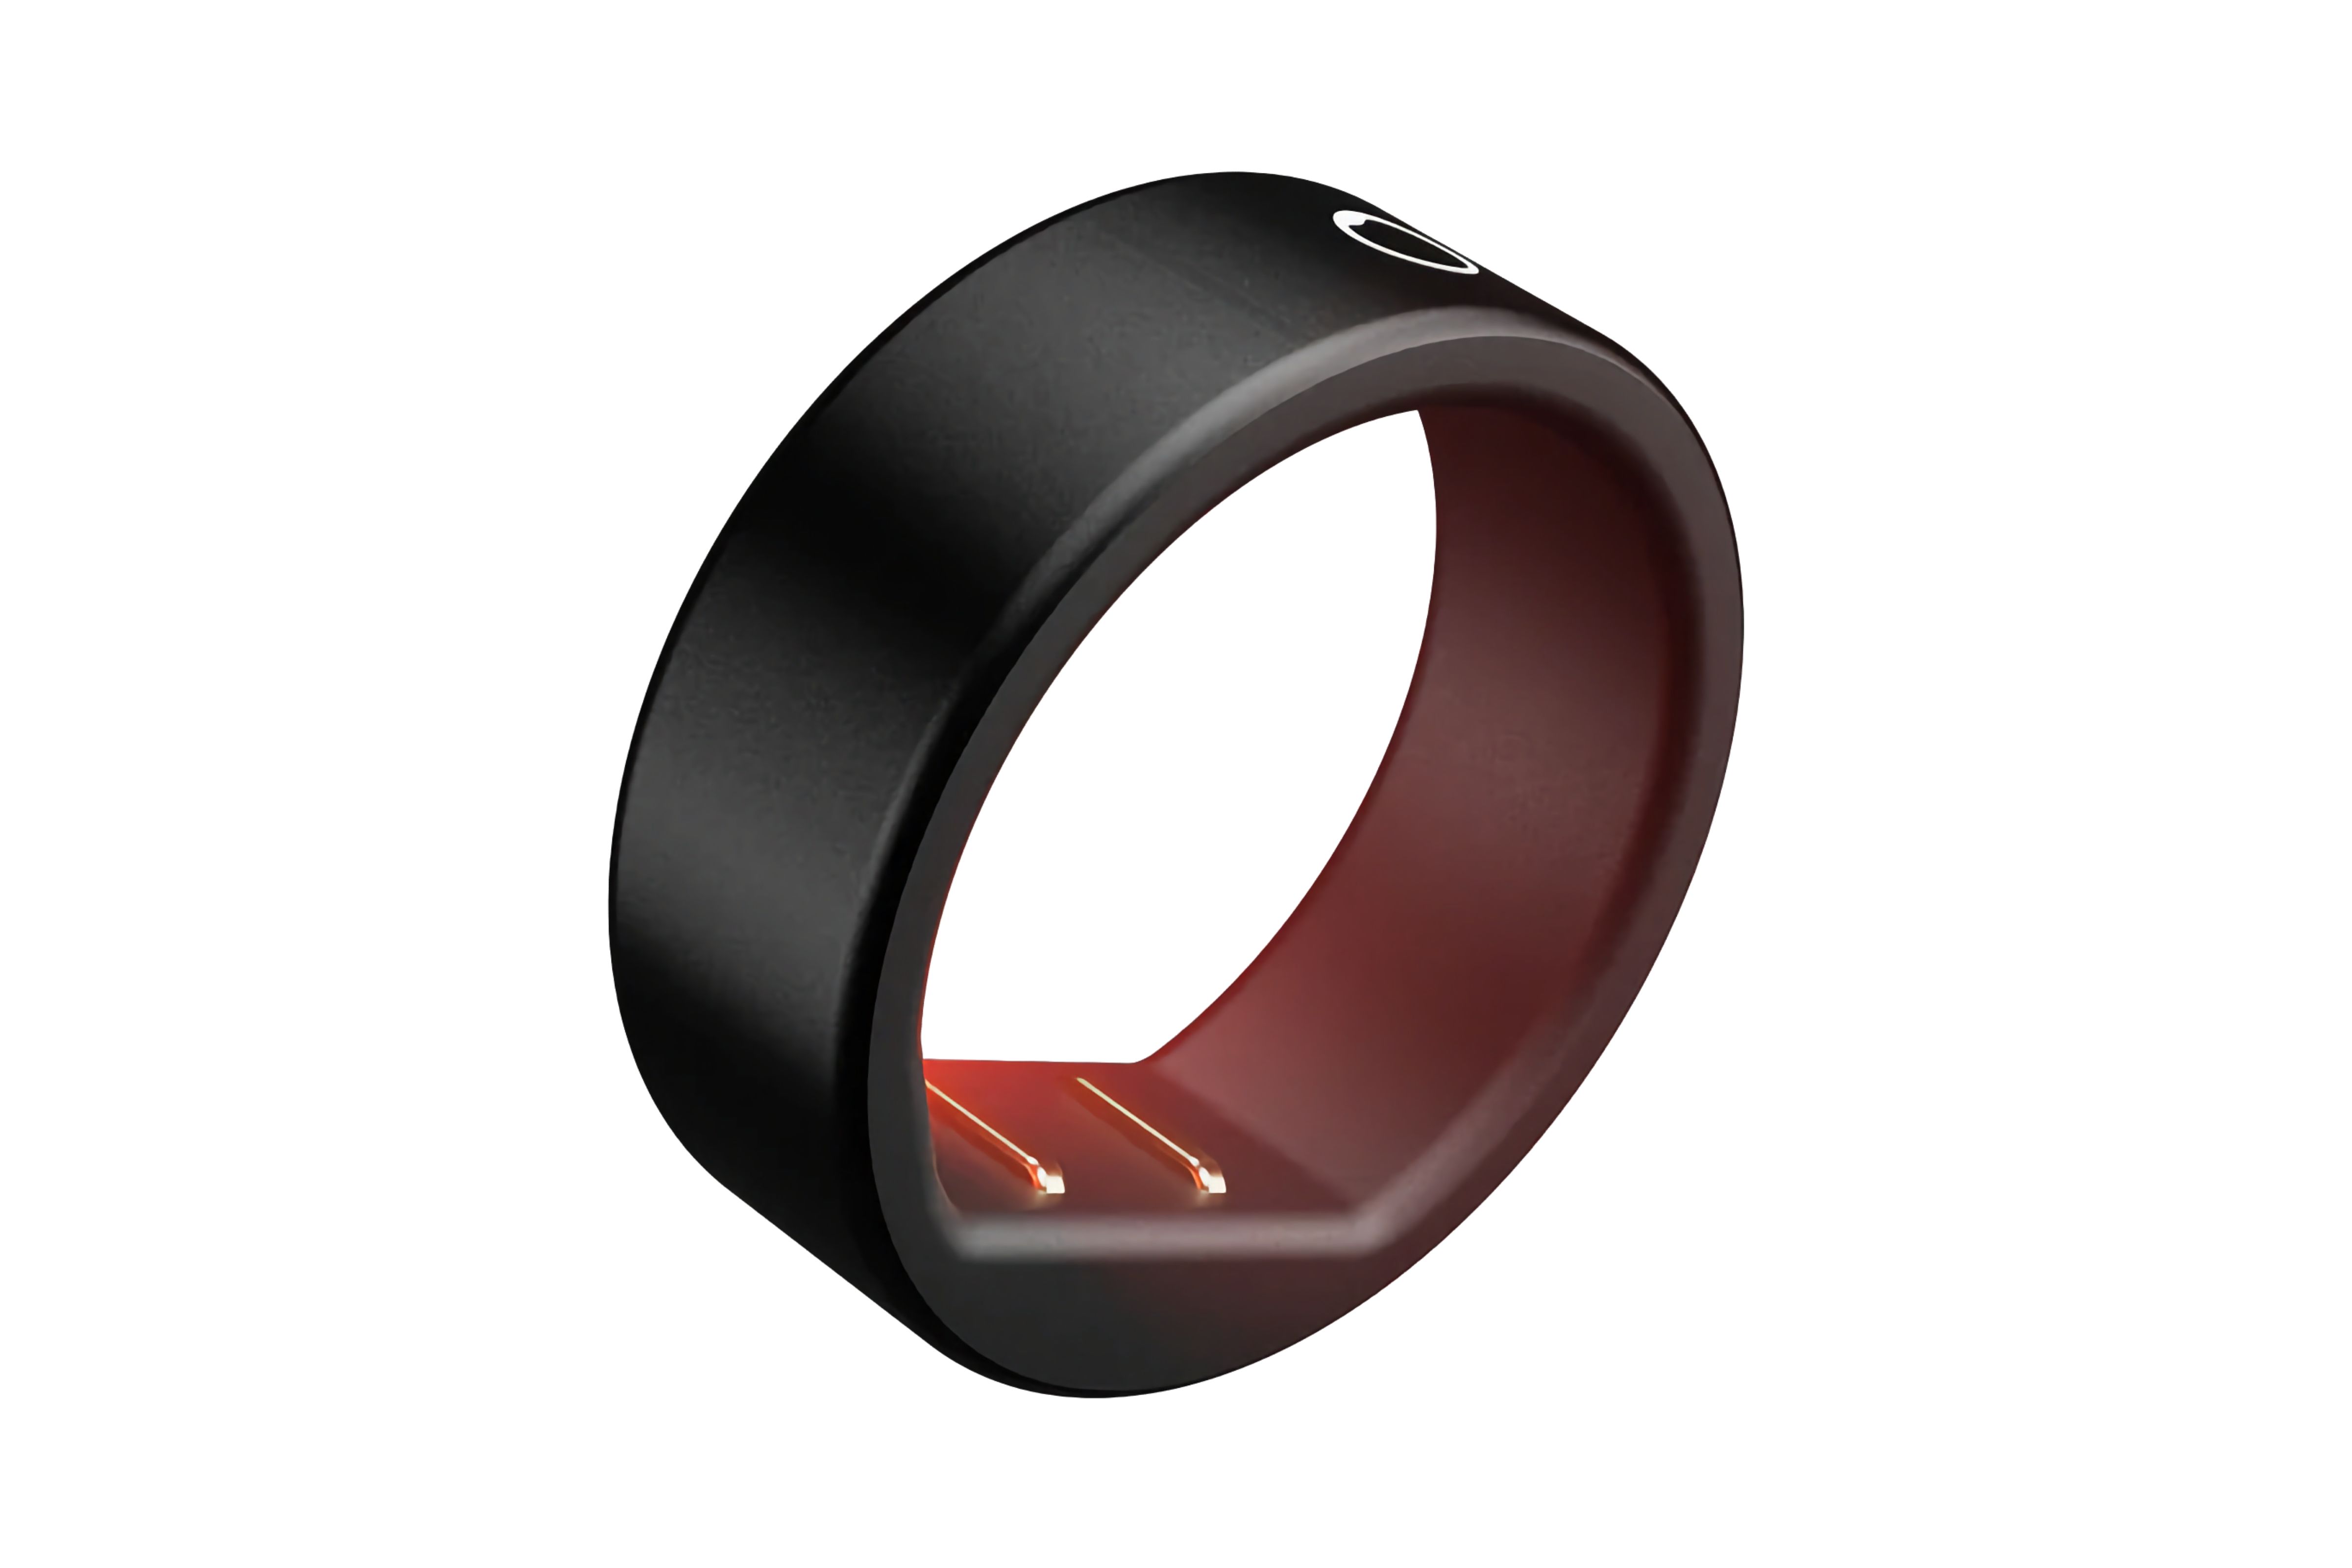 Ultrahuman Ring Air: A balanced look at its wellness features